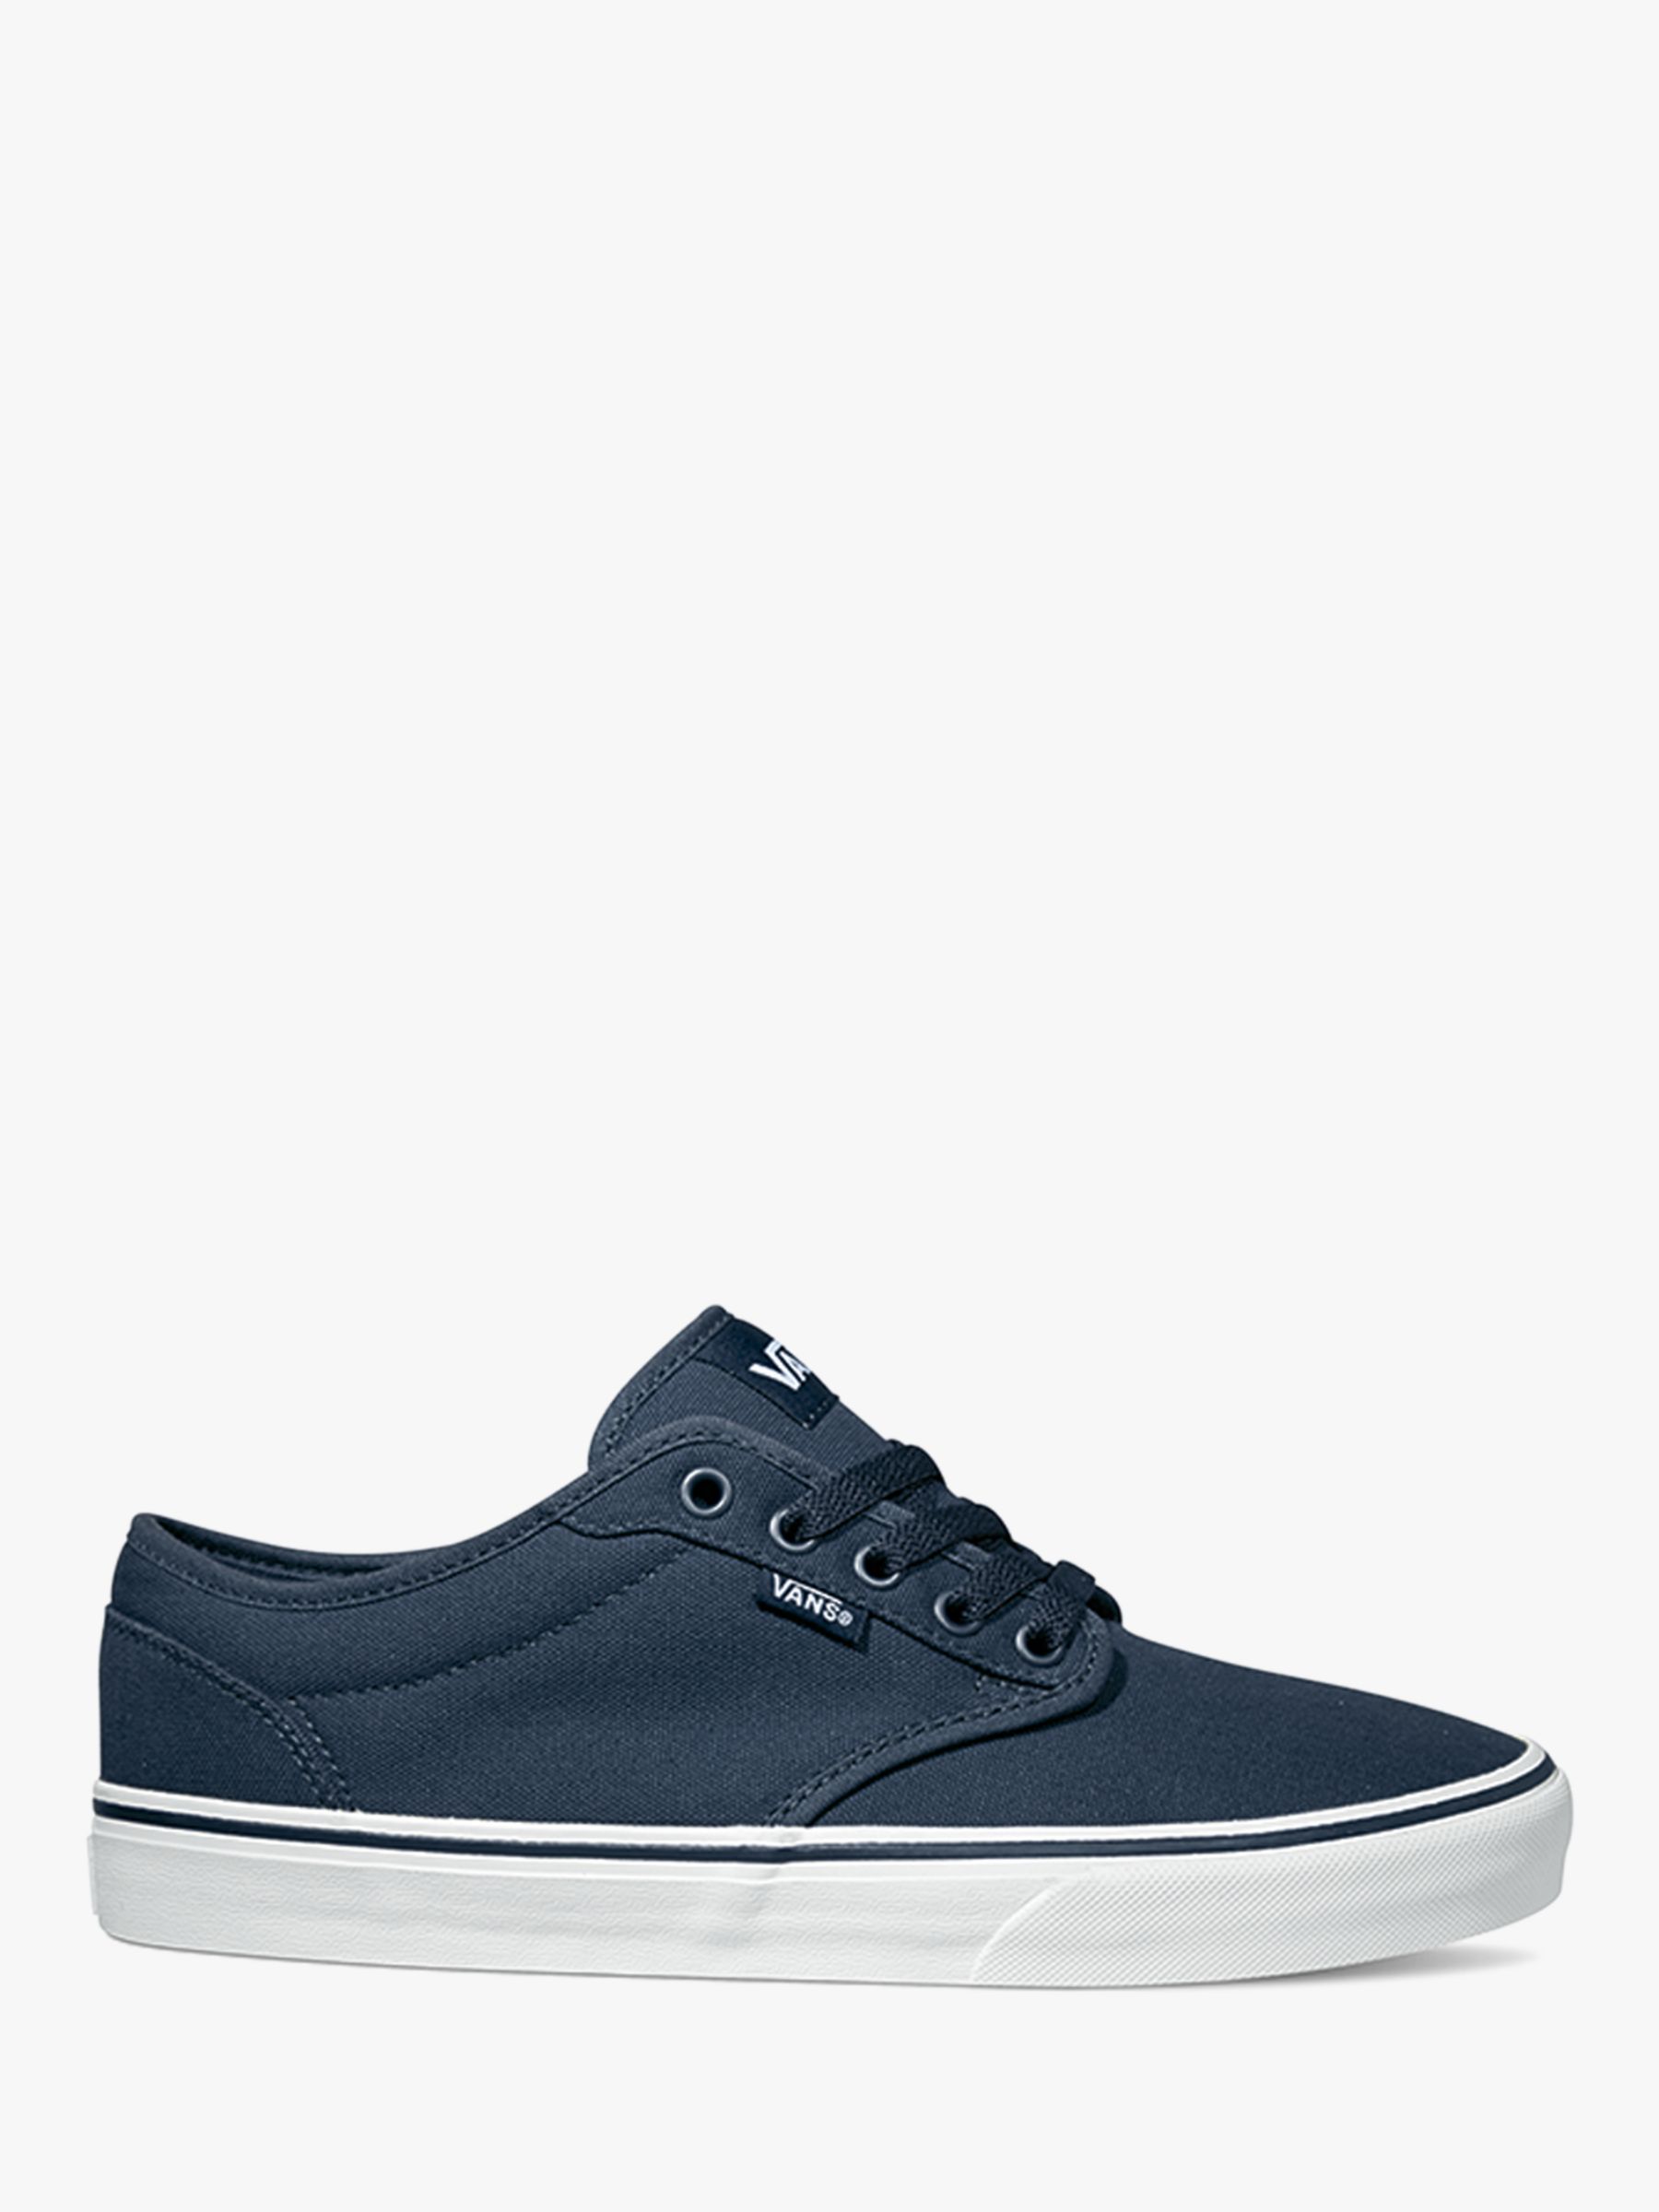 vans atwood canvas trainers review